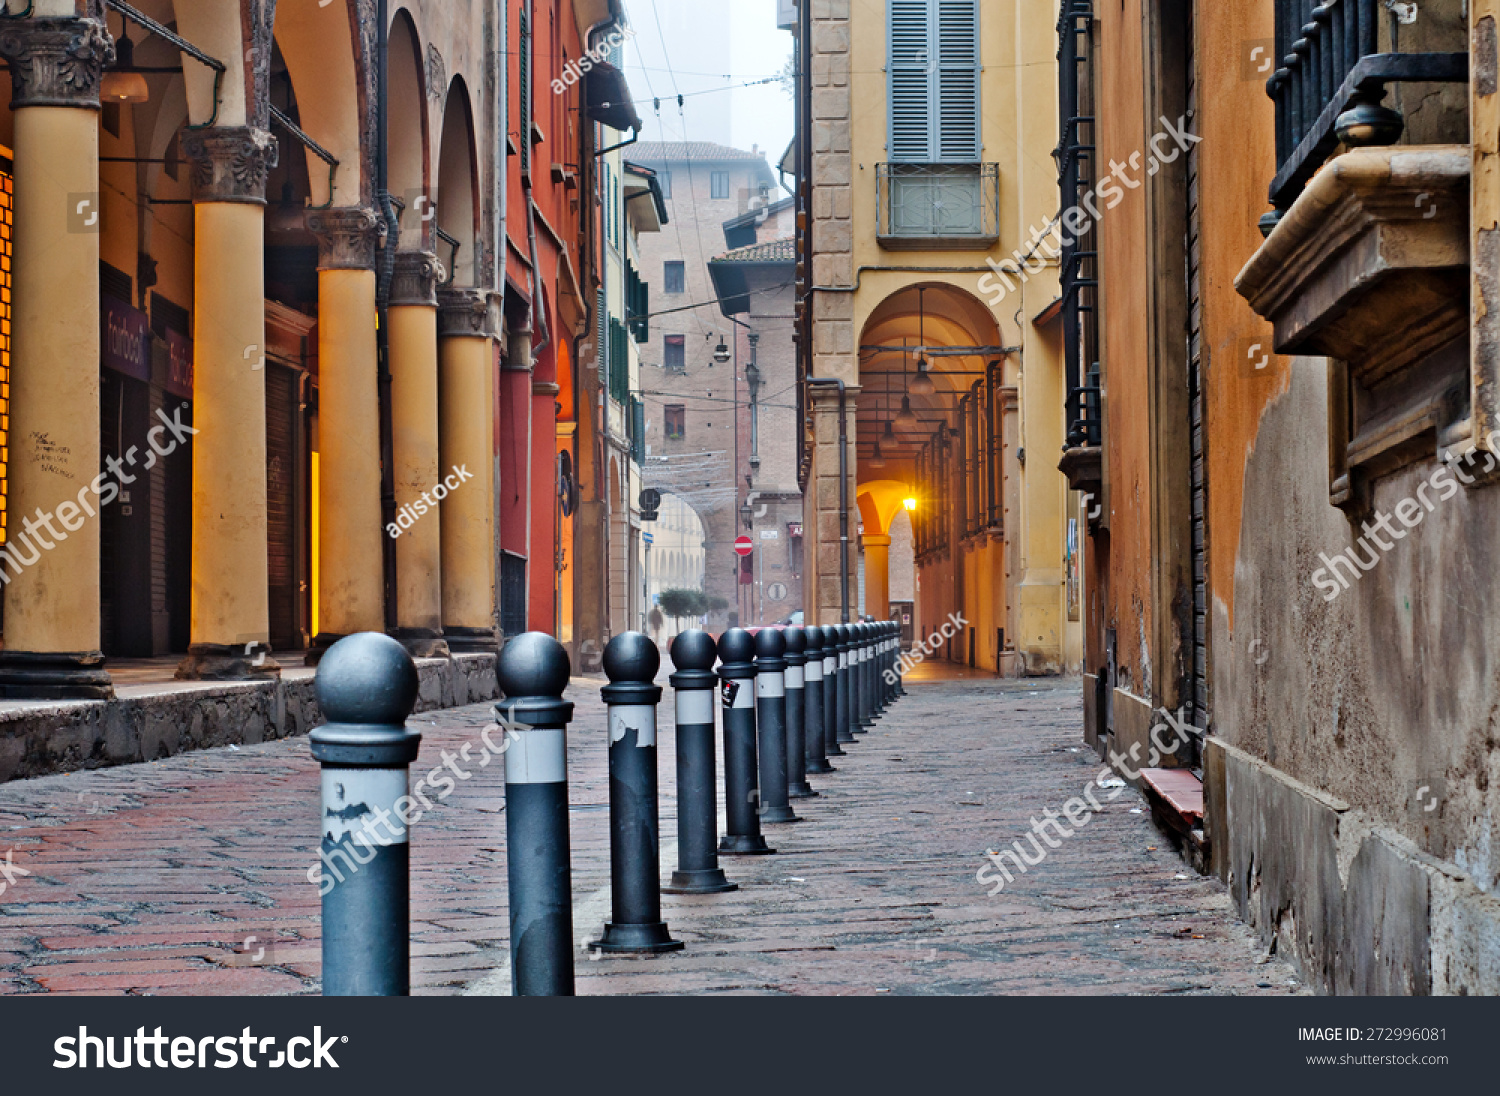 Old street view Bologna city, Italy. Cobble stone street with bollards. Renaissance buildings. #272996081